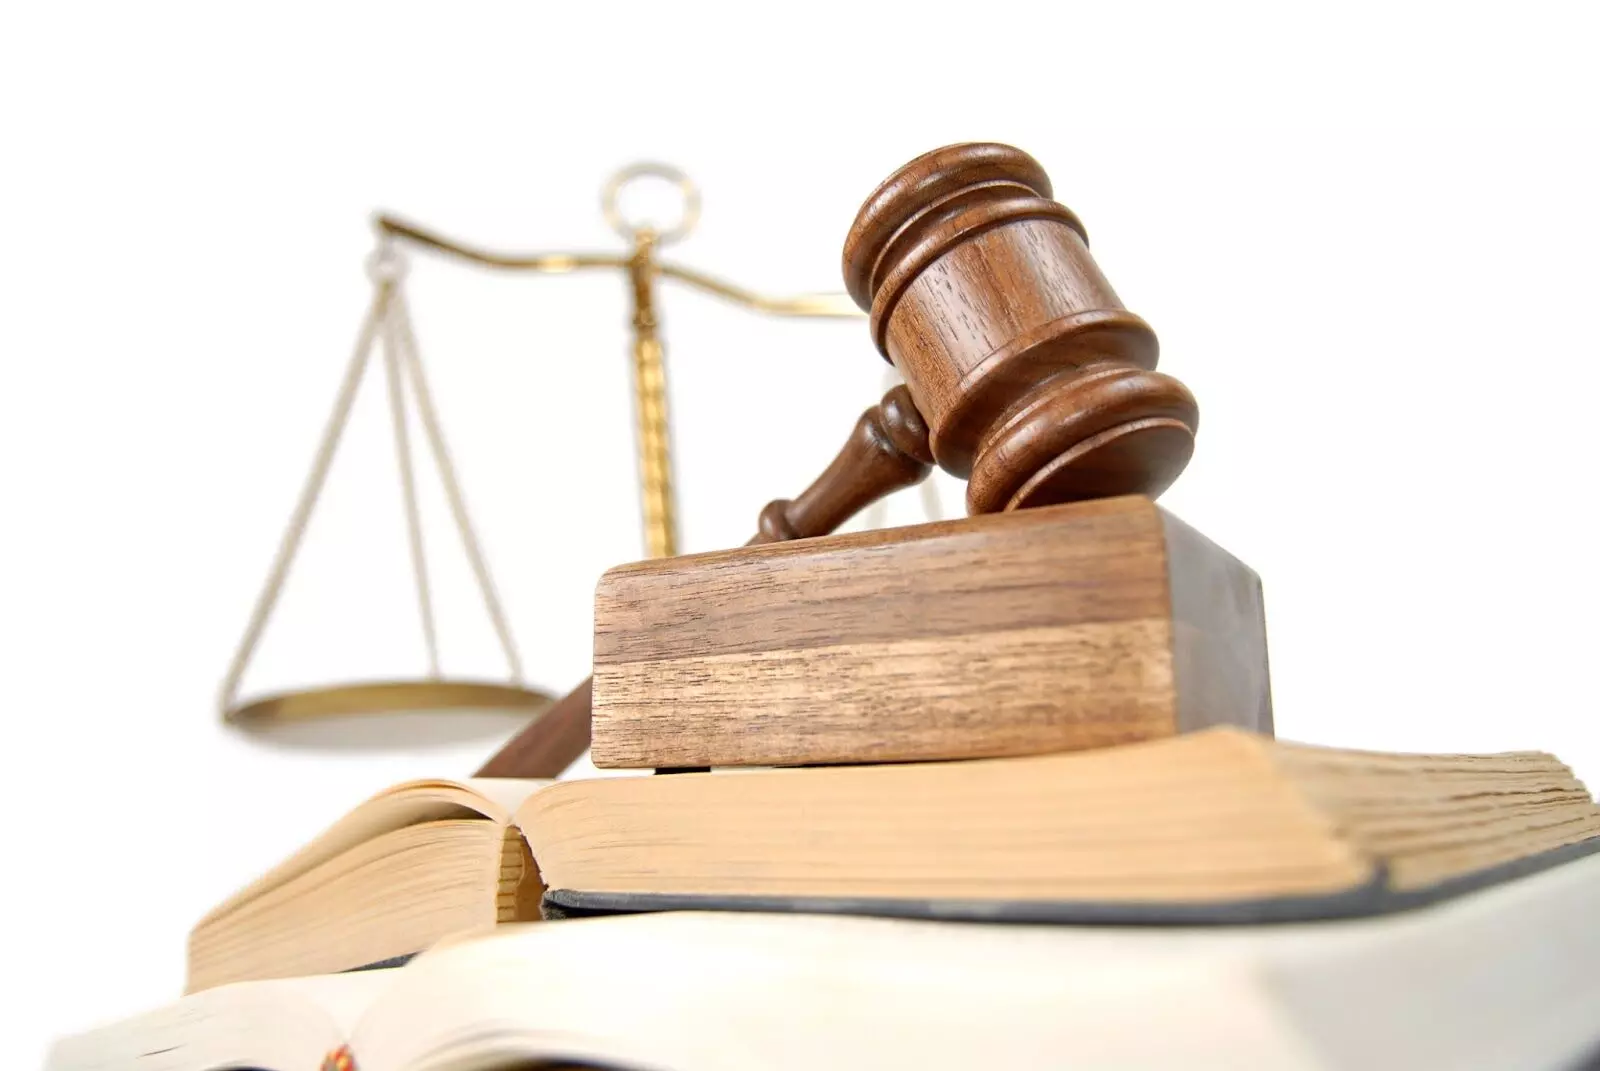 Legal practitioner charge for alleged forgery of property document